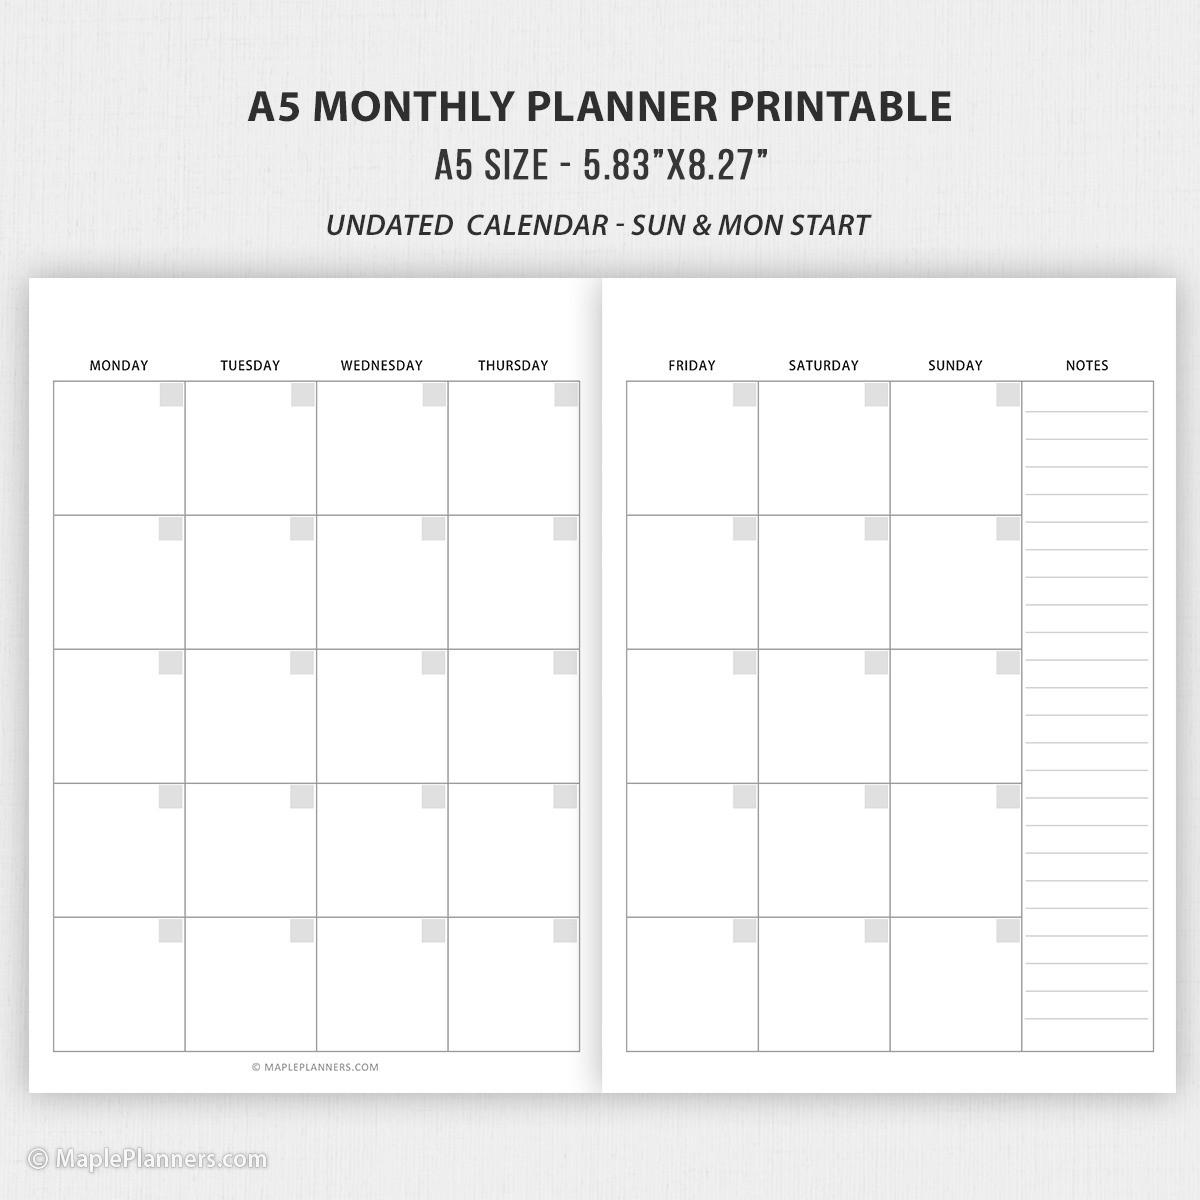 A5 Planner Printable Inserts A5 Weekly and Monthly Planner Inserts